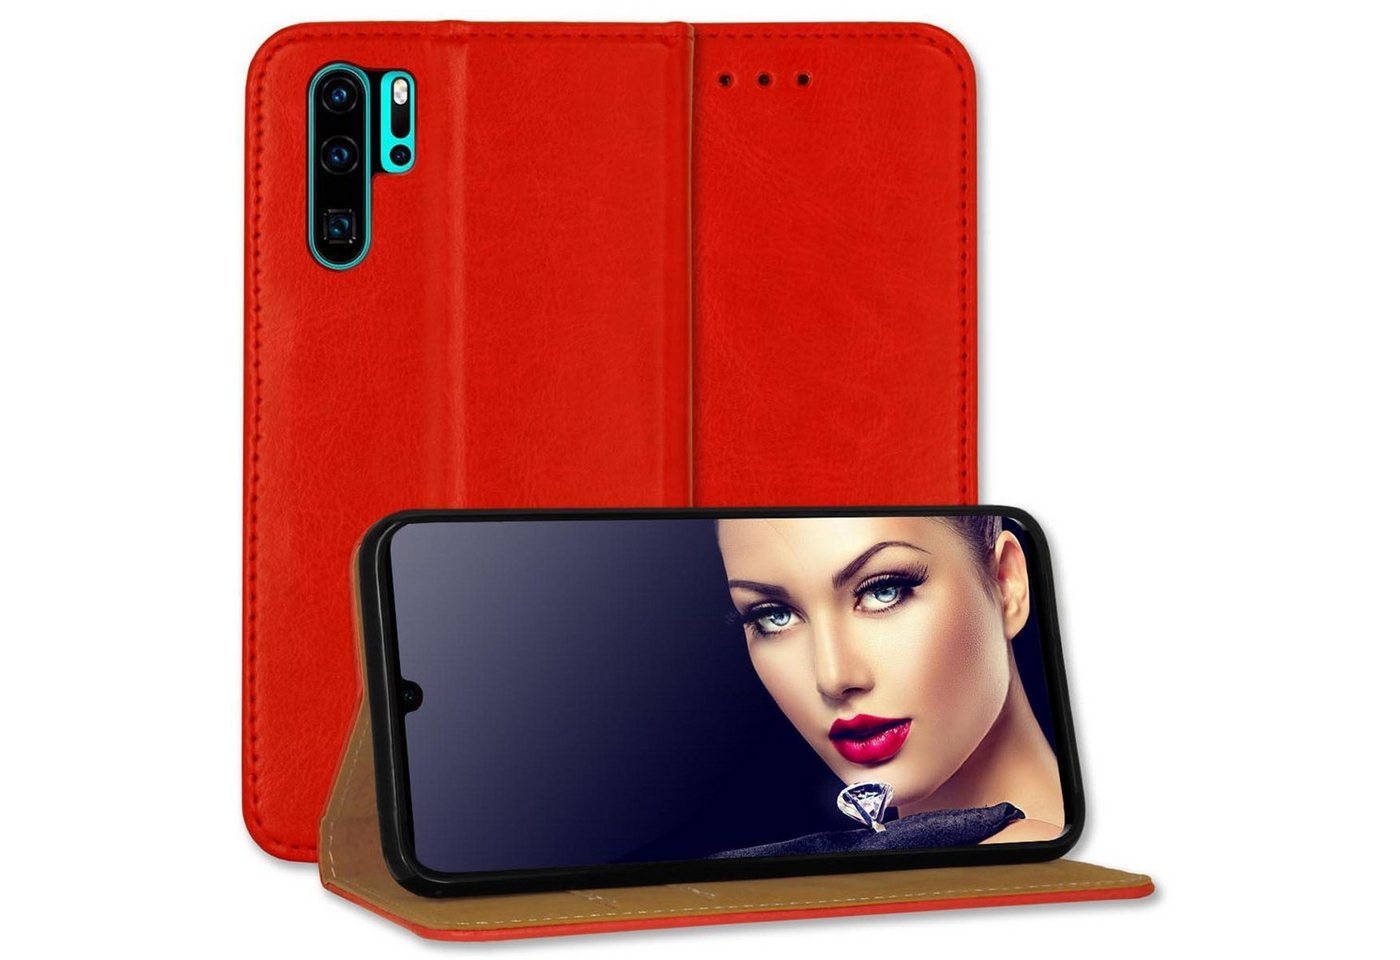 mtb more energy Smartphone-Hülle Bookstyle Business - Farbe rot, für: Huawei P30 Pro, P30Pro New Edition (6.47) von mtb more energy